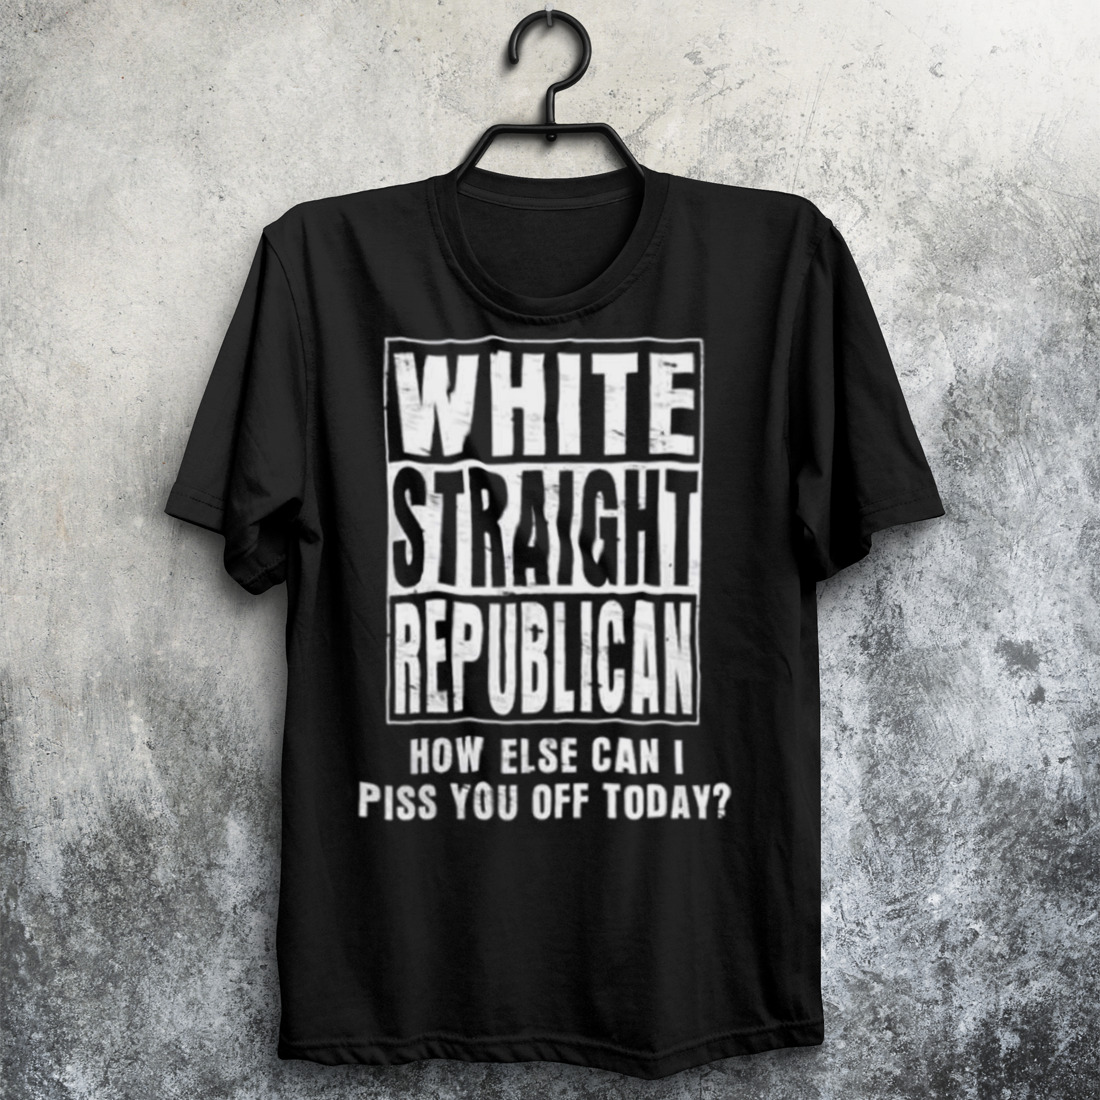 White straight republican how else can I piss you off today shirt